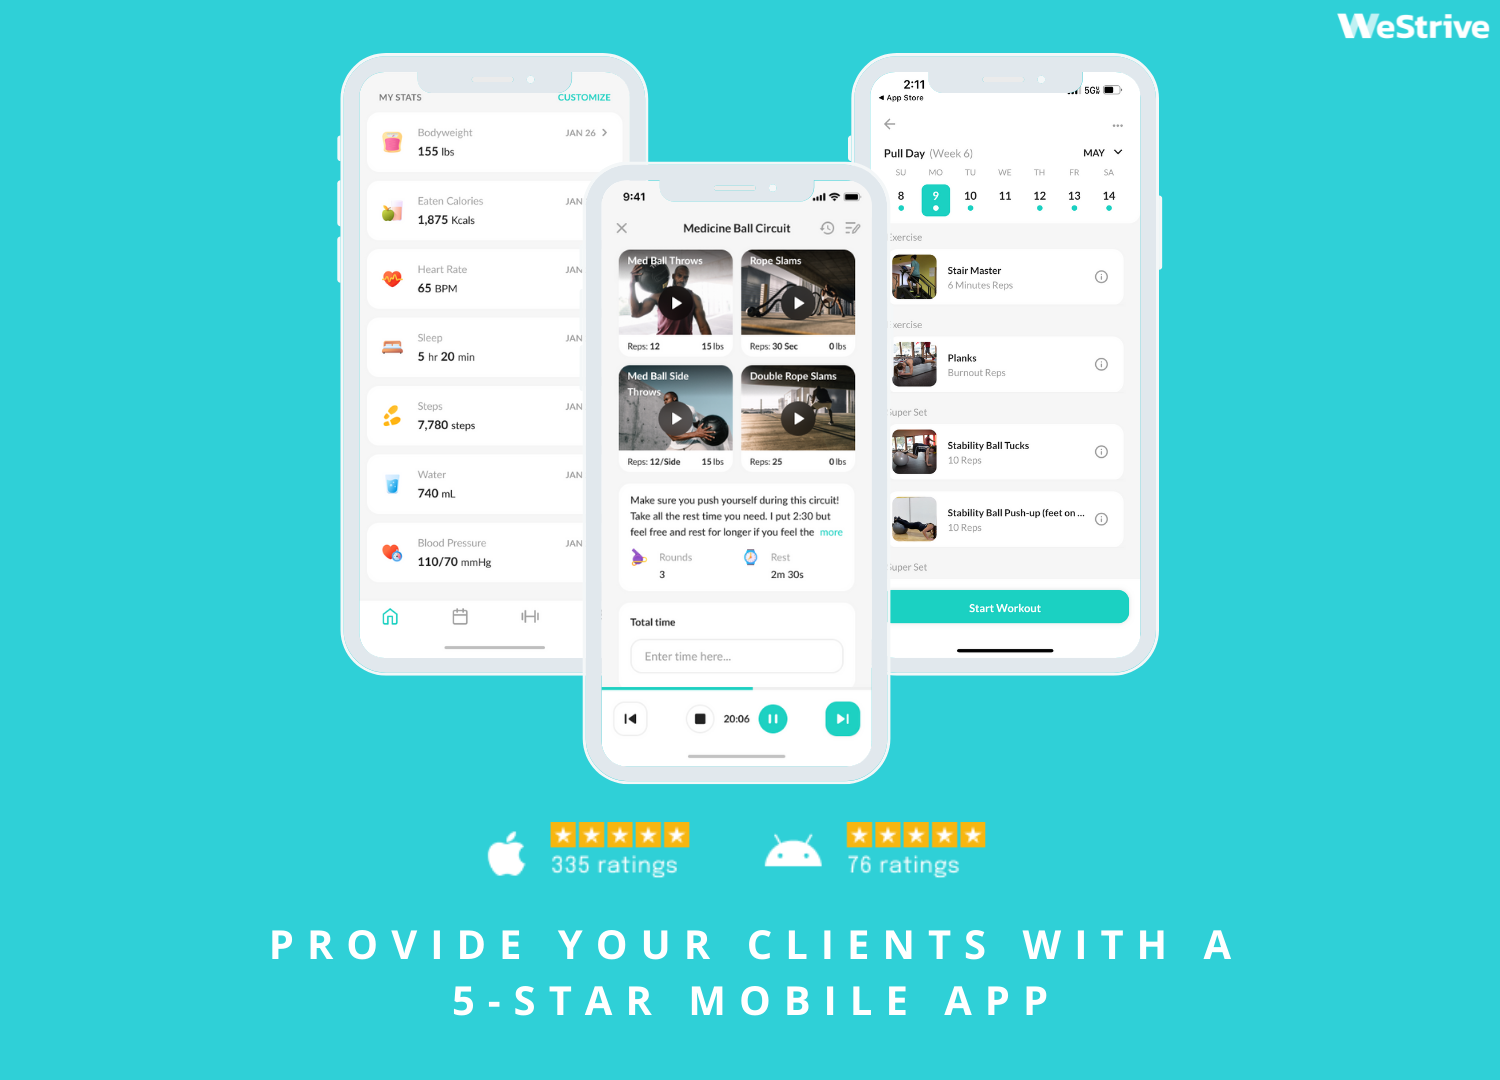 Provide your clients with a 5-star mobile app